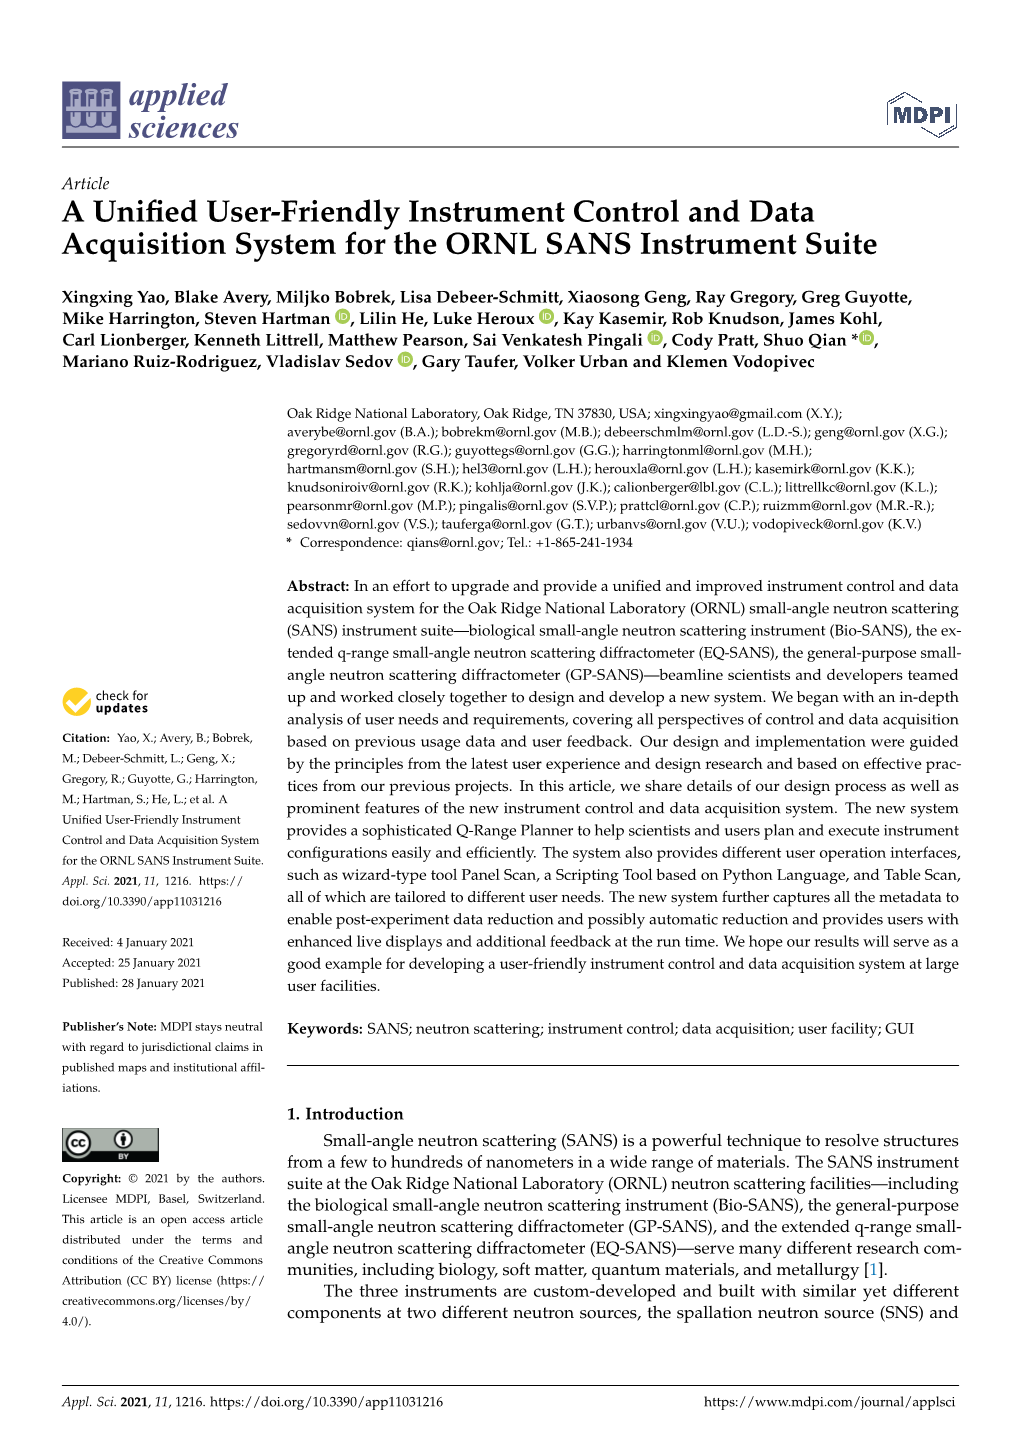 A Unified User-Friendly Instrument Control and Data Acquisition System for the ORNL SANS Instrument Suite